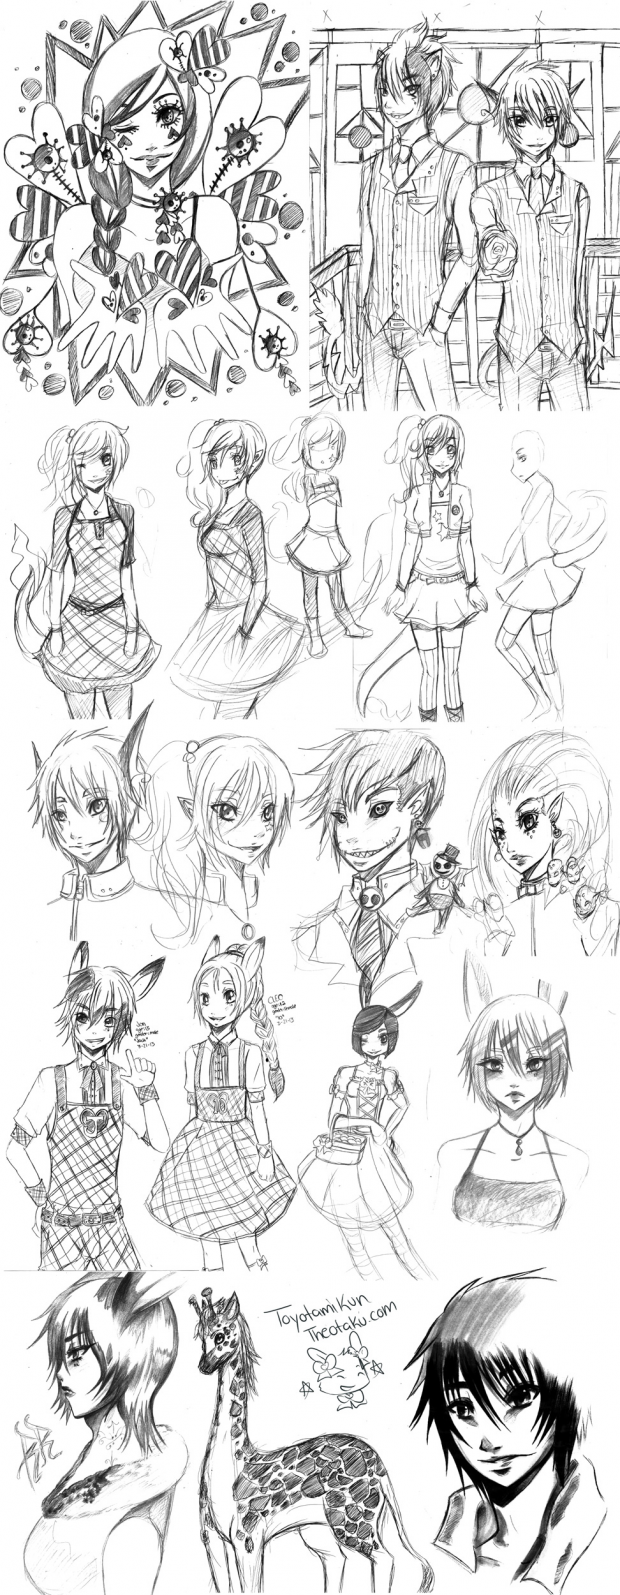 Sketch Attack: Character Designs.